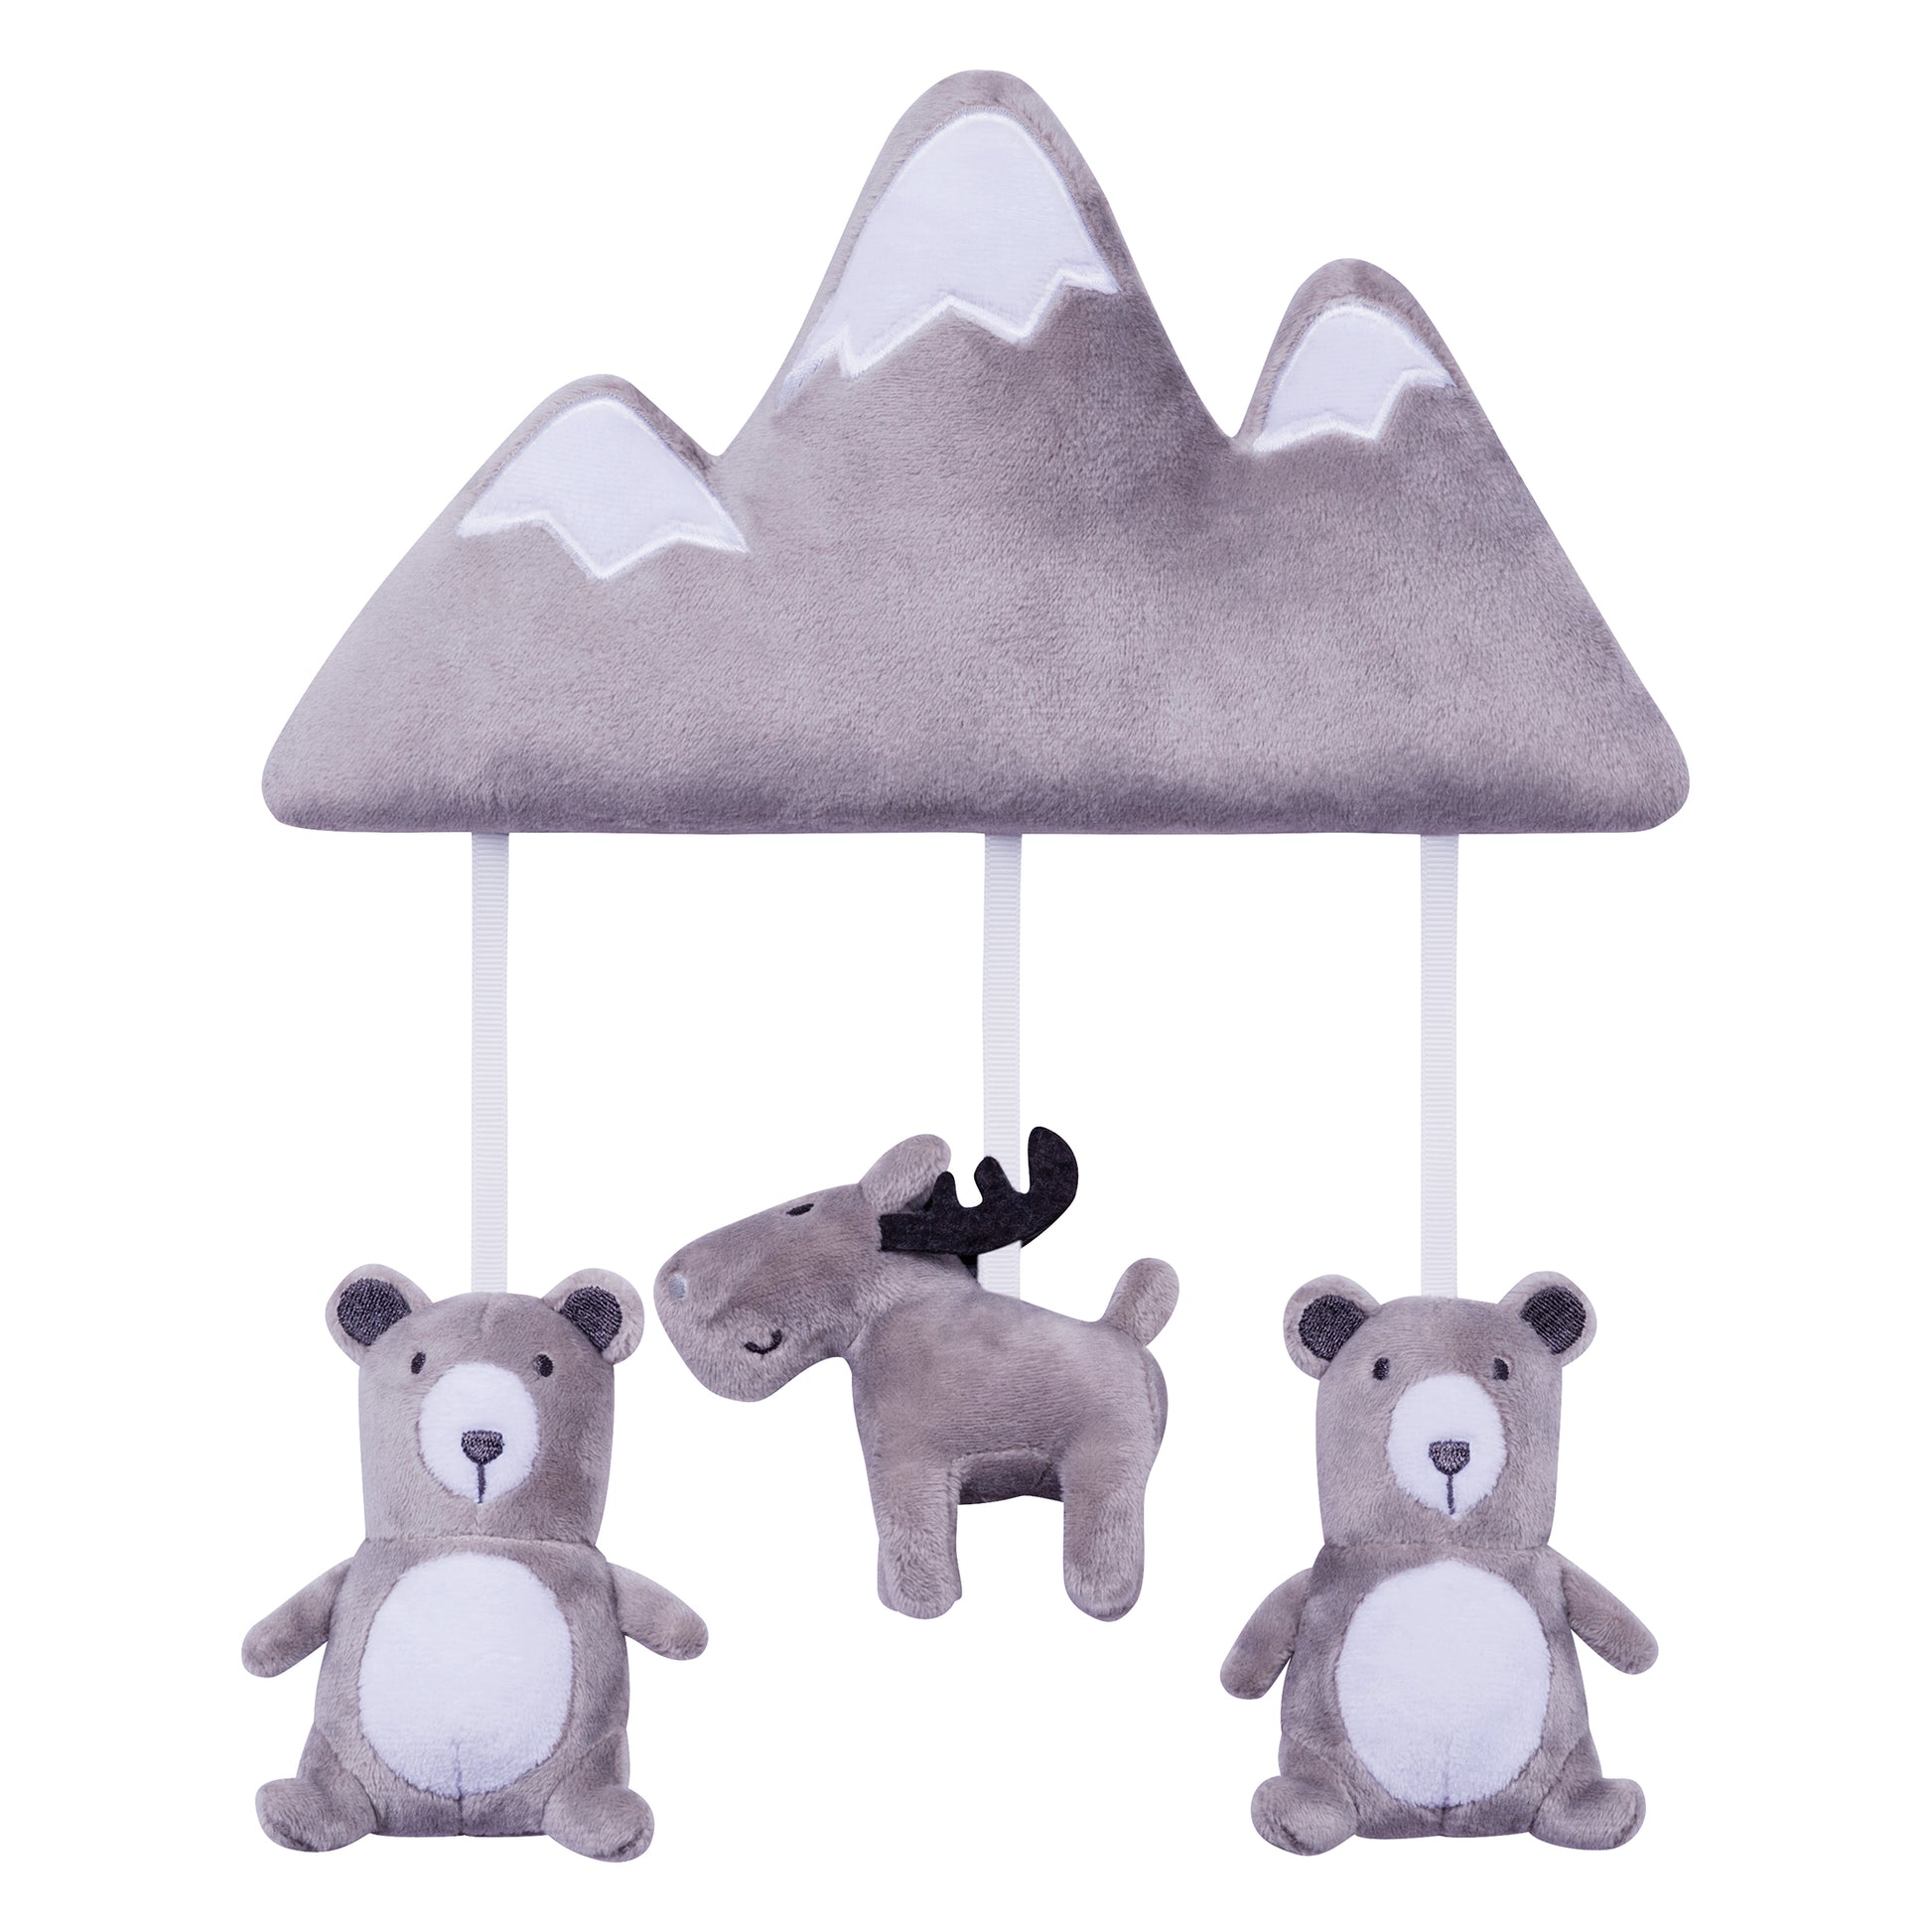 Forest Mountain Musical Crib baby mobile features a mountain piece with 3 baby animals all in gray